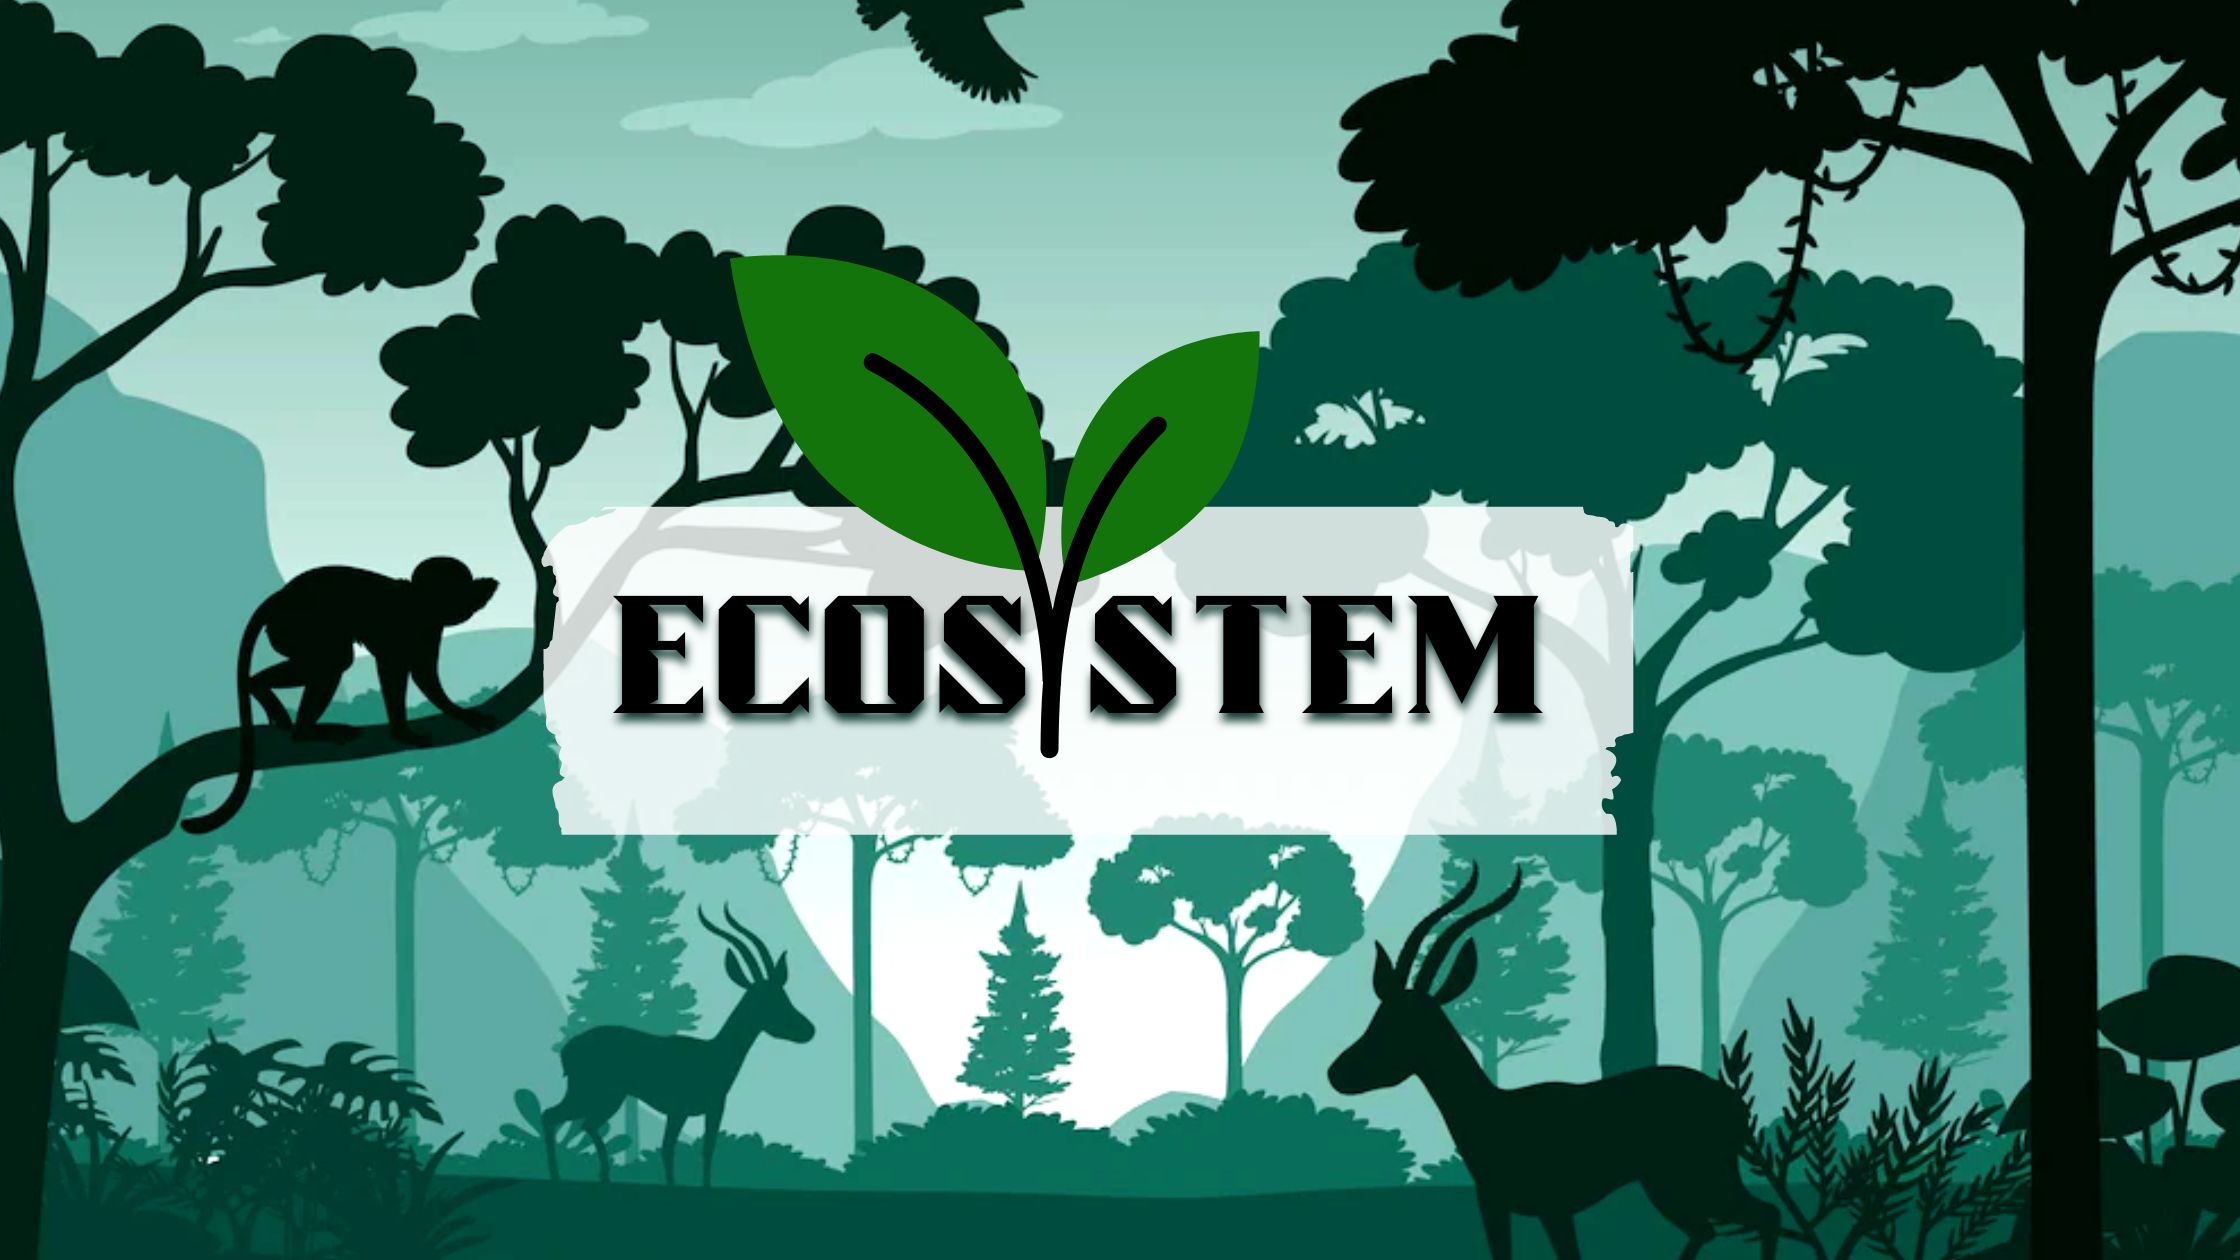 What is an Ecosystem and its importance?